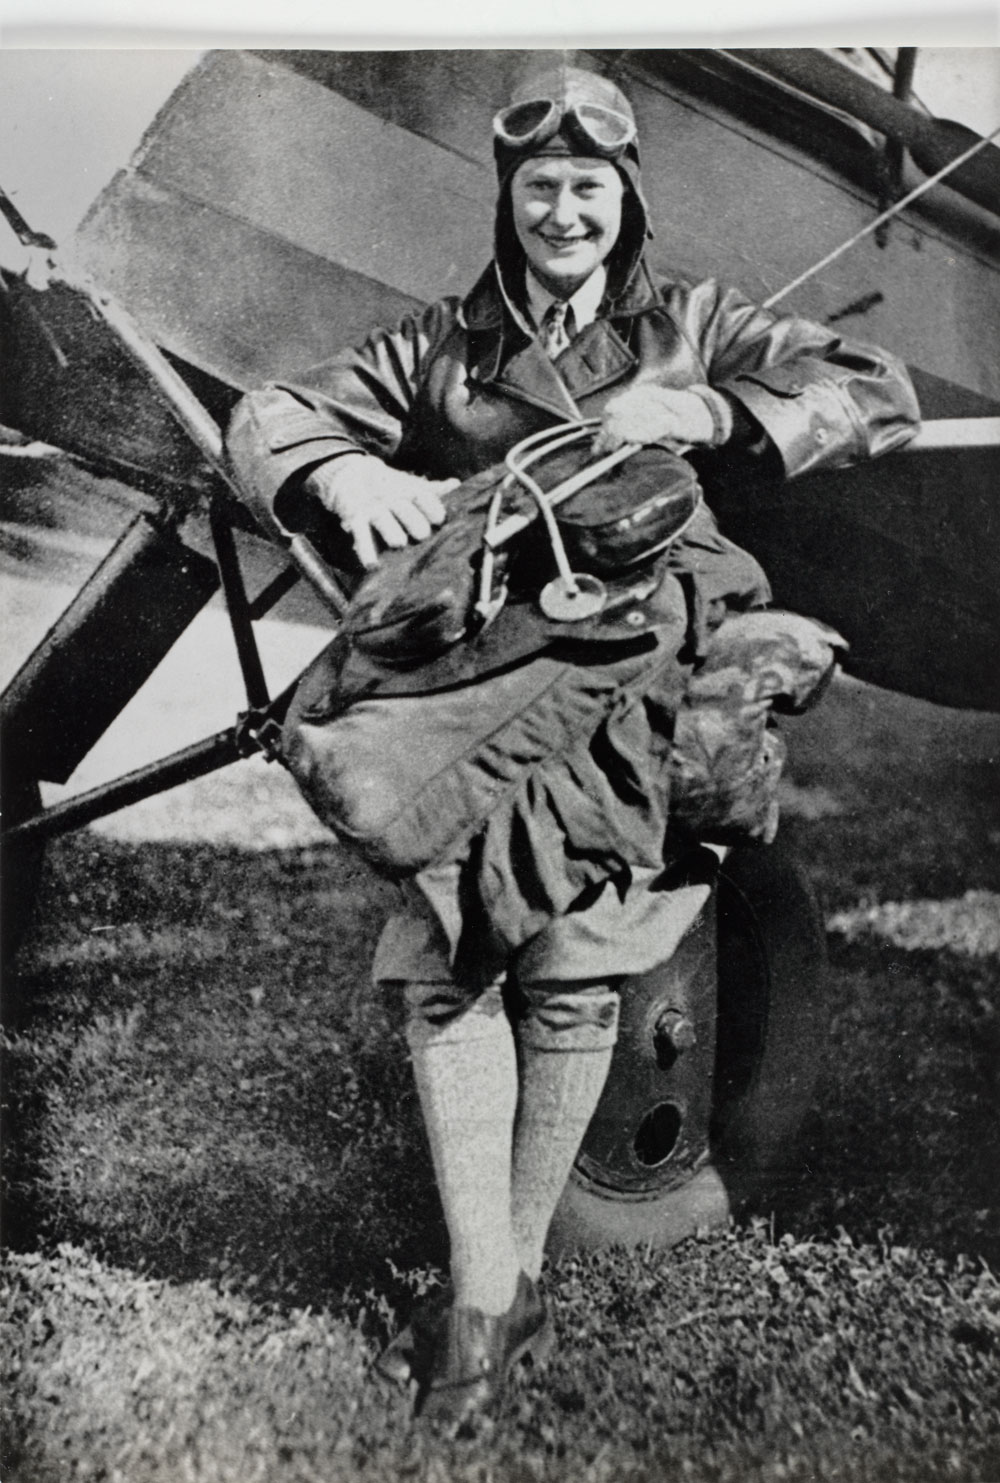 Image 2 of 5 - Black-and-white photo showing Nancy Bird Walton standing casually in front of an old-fashioned aircraft wearing full aviation gear, including a cap, with goggles pushed up over her forehead